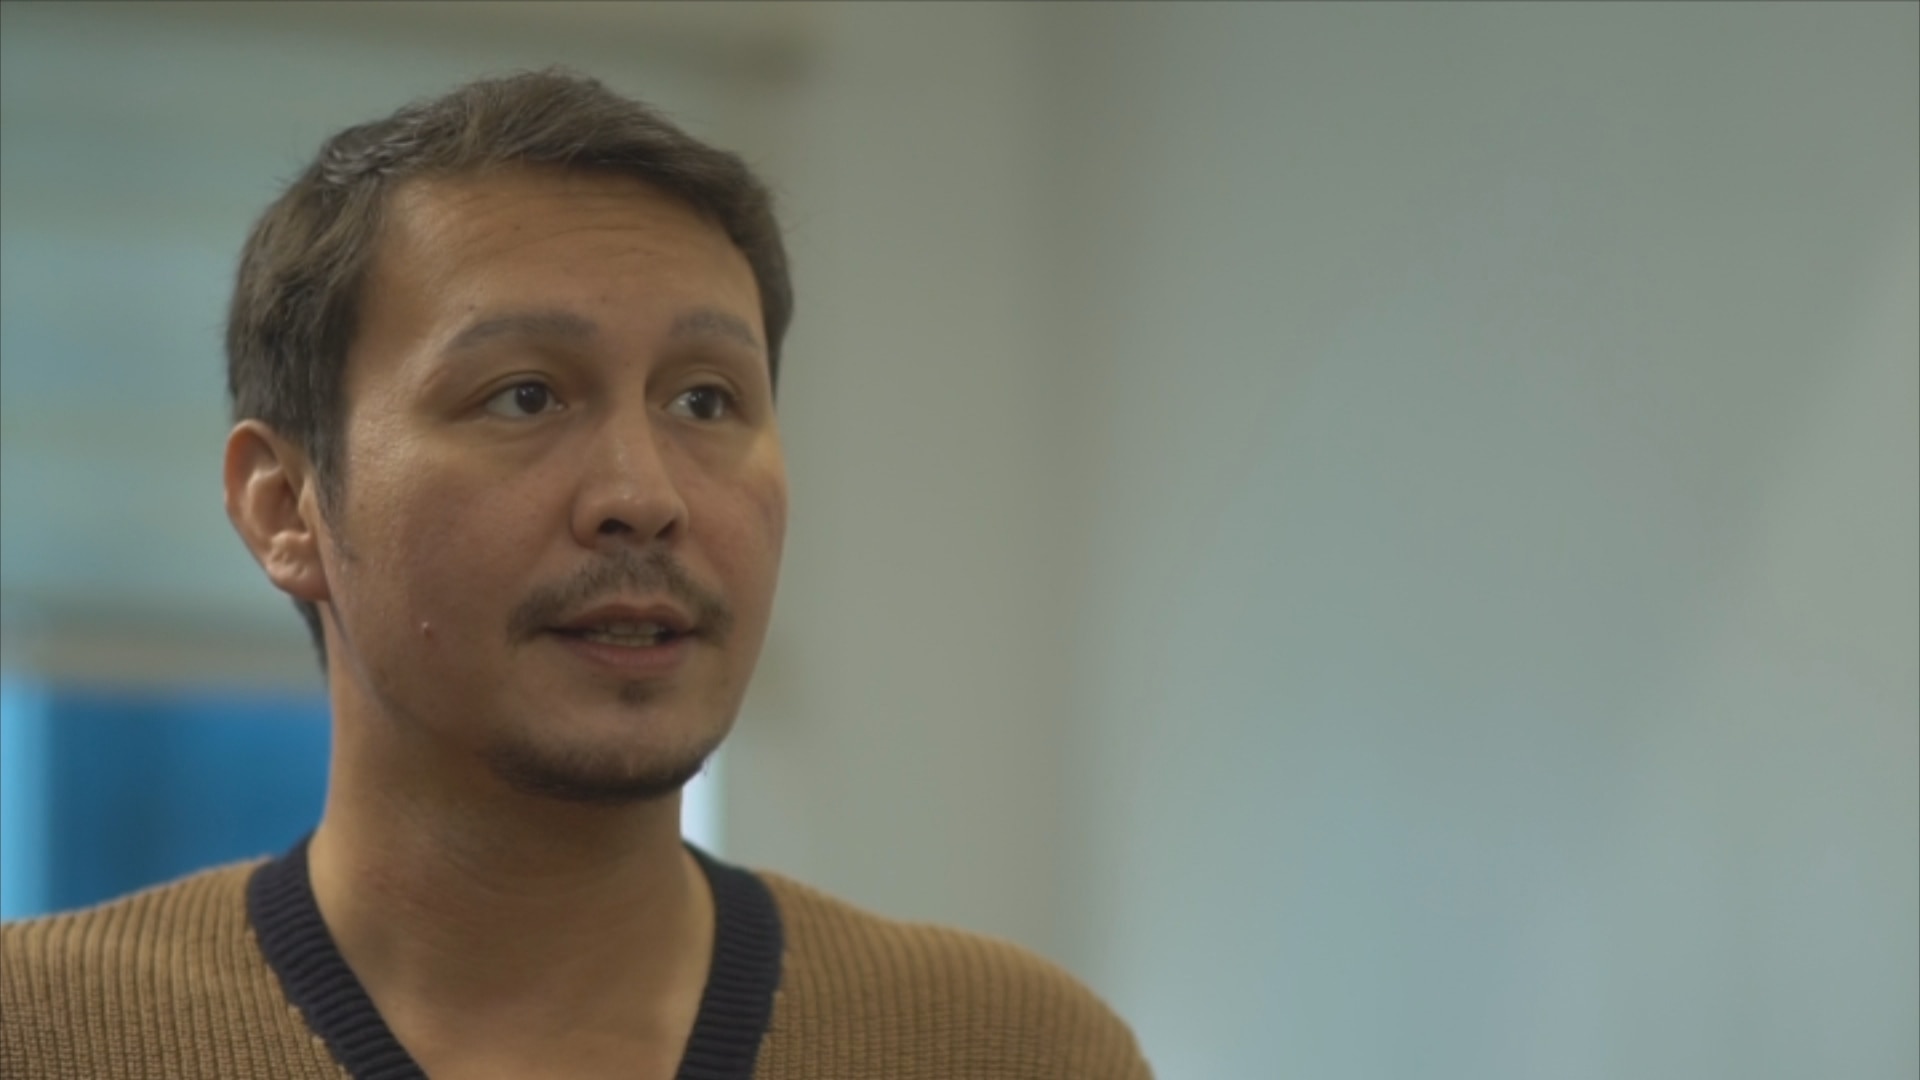 “Senior High” star Baron Geisler shares his redemption story in “Tao Po”